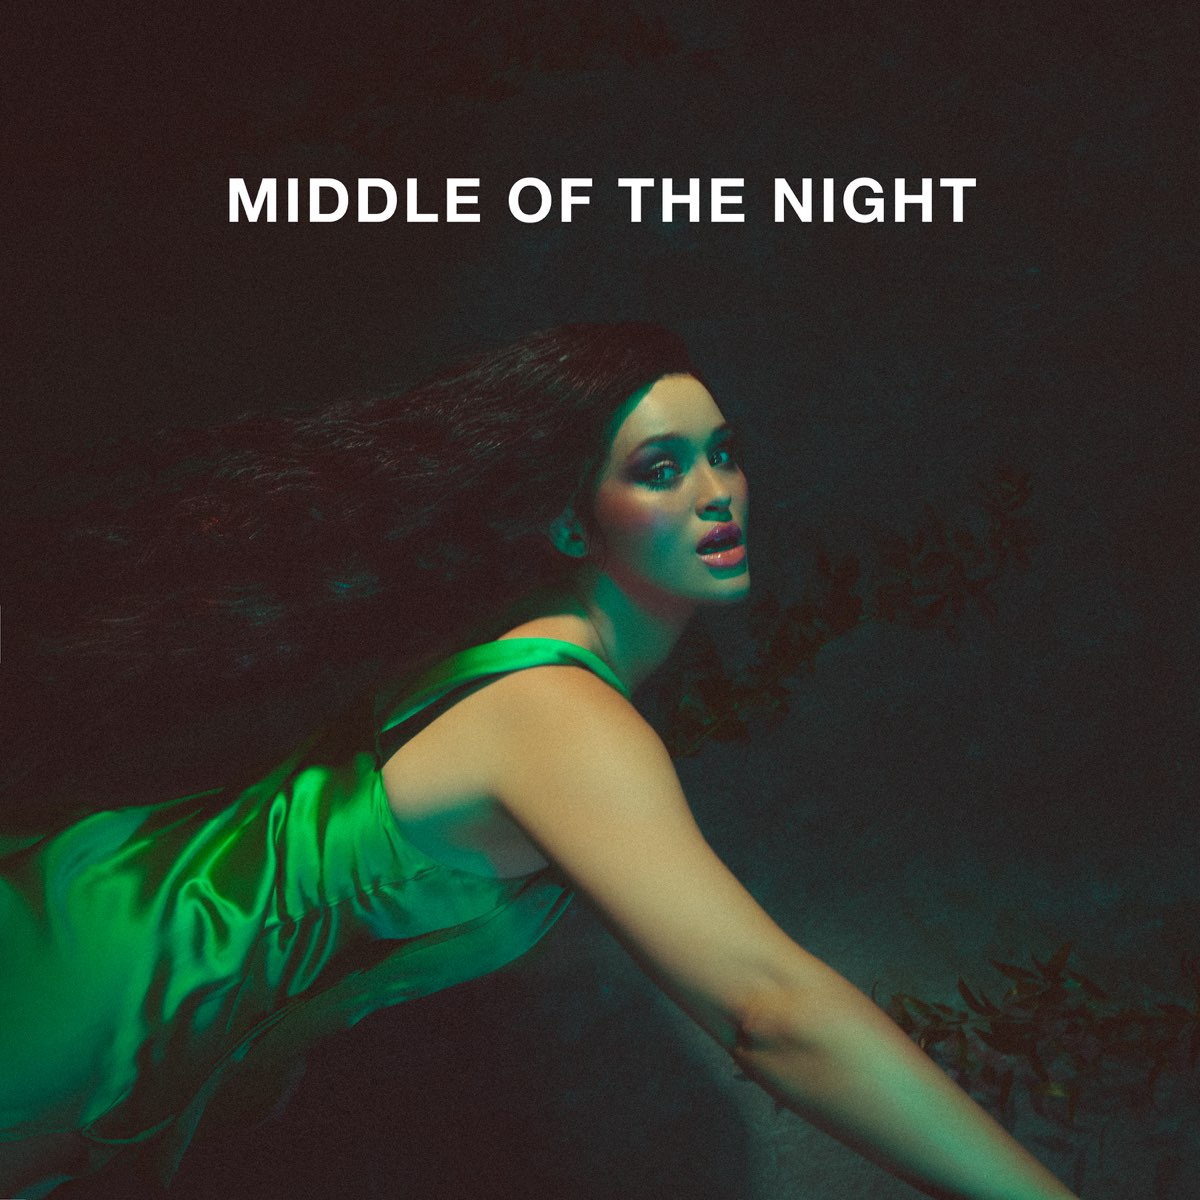 Элли Duhe. Elley Duhe Middle of the. Middle of the Night. Элли Дуэ Middle of the Night. Middle of the night mp3